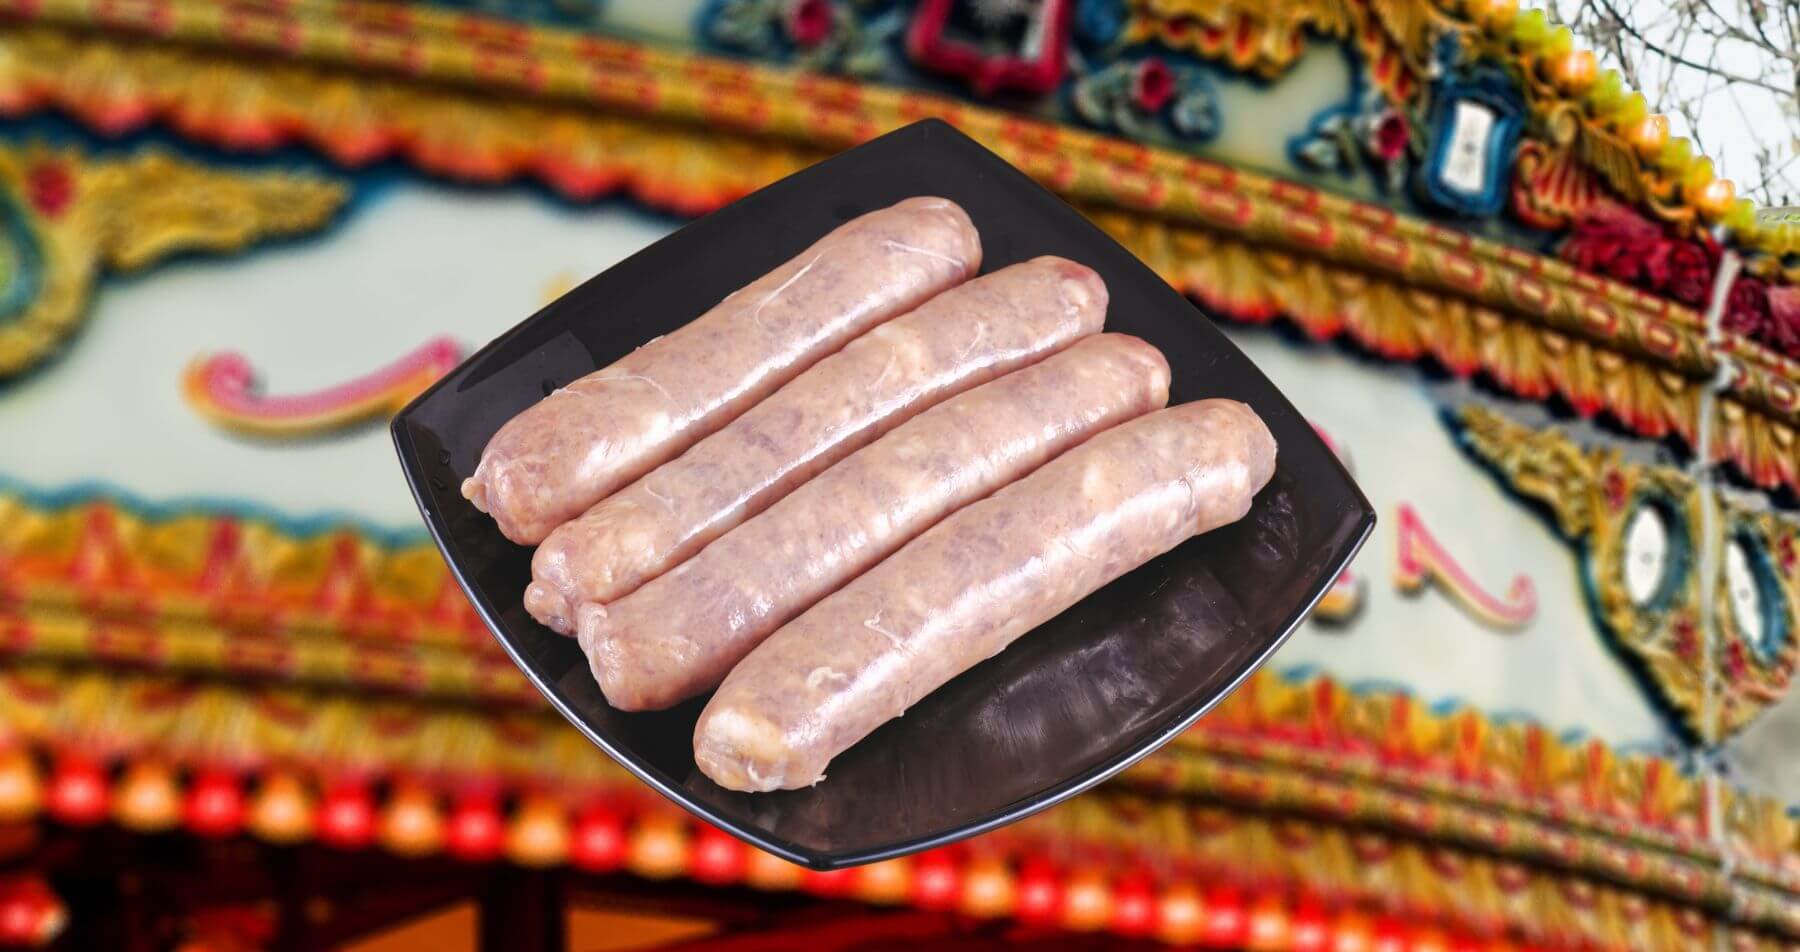 Some sausages at a funfair